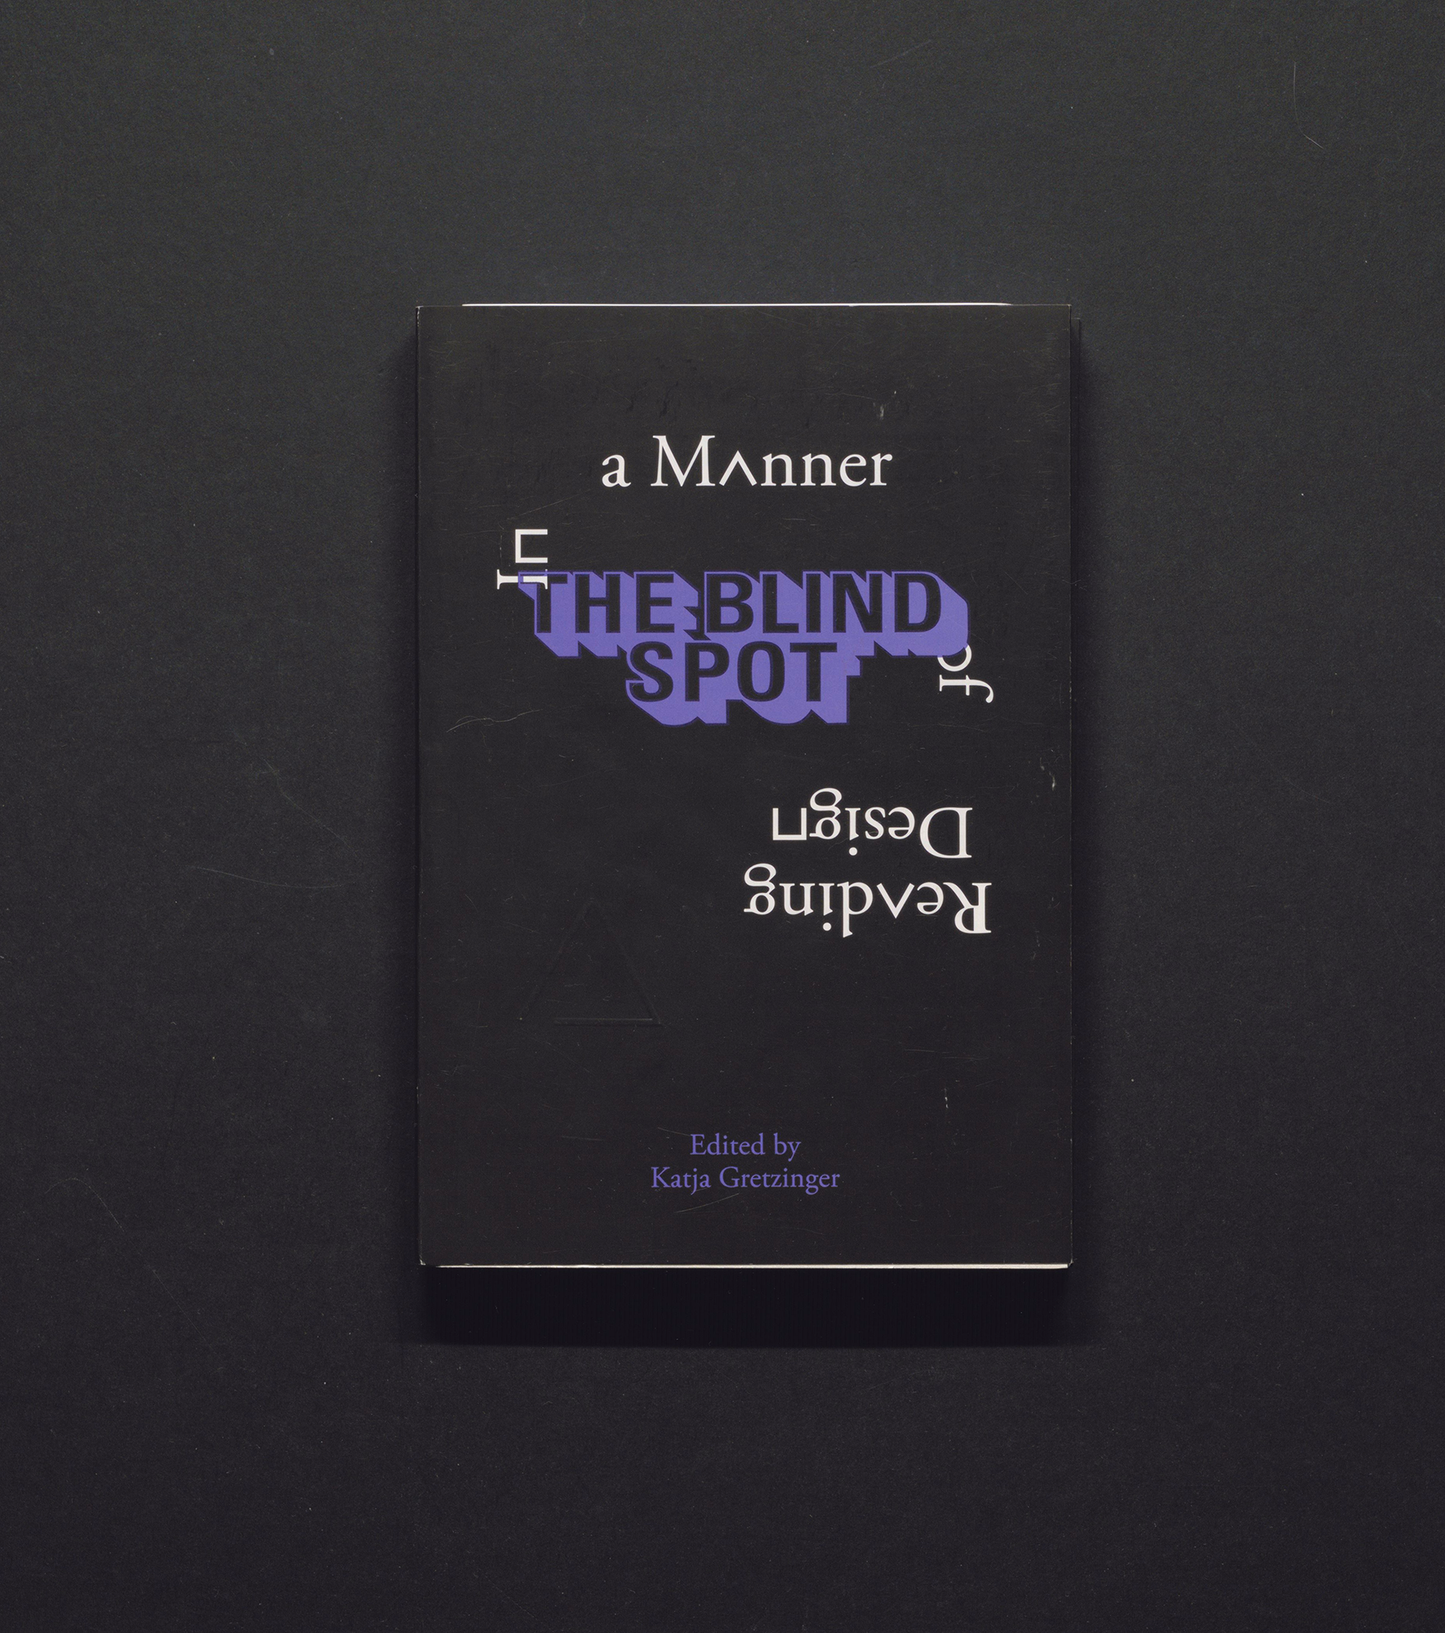 In a Manner of Reading Design - – The Blind Spot